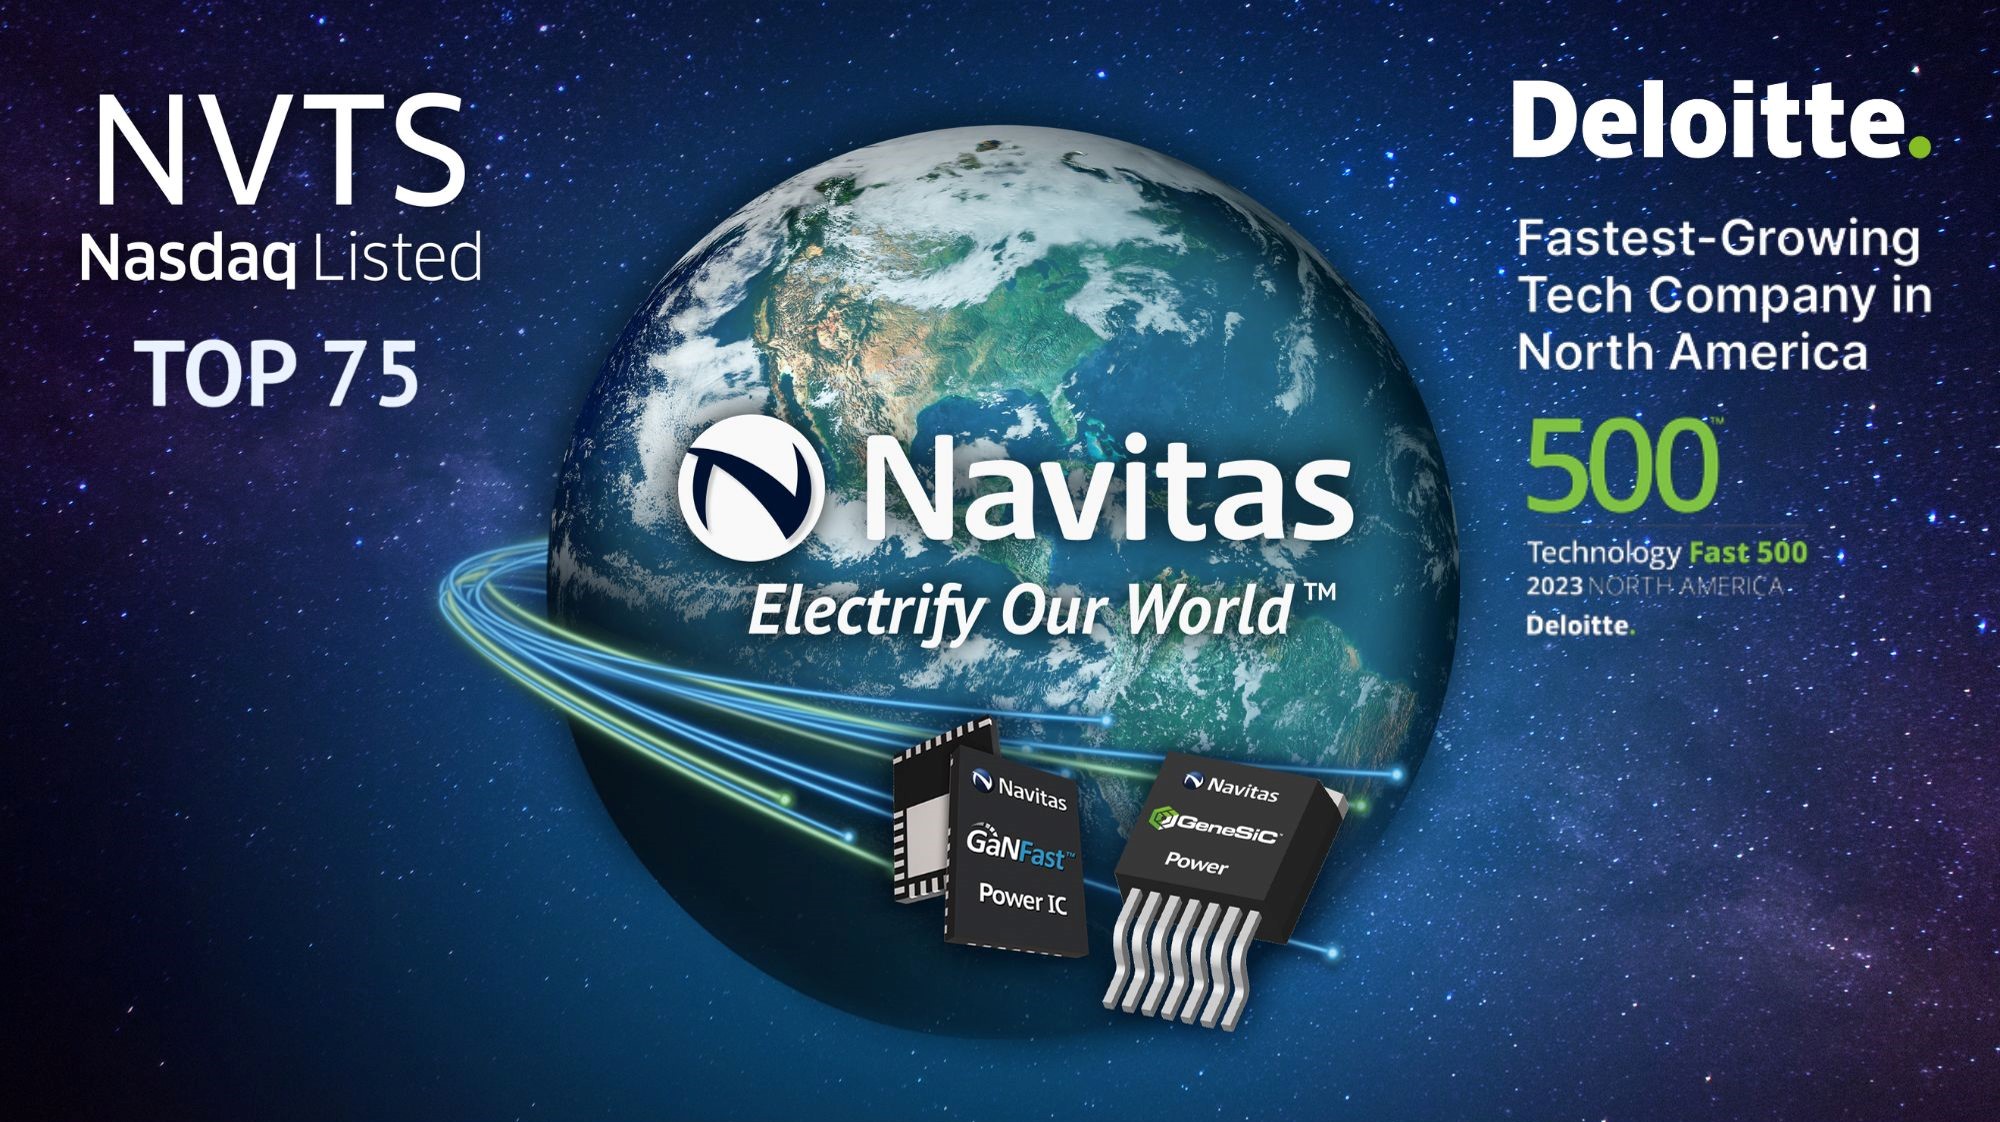 Navitas’ 2,129% Increase in 3-Year Revenue Ranks 72nd in 2023 NA Deloitte Technology Fast 500™